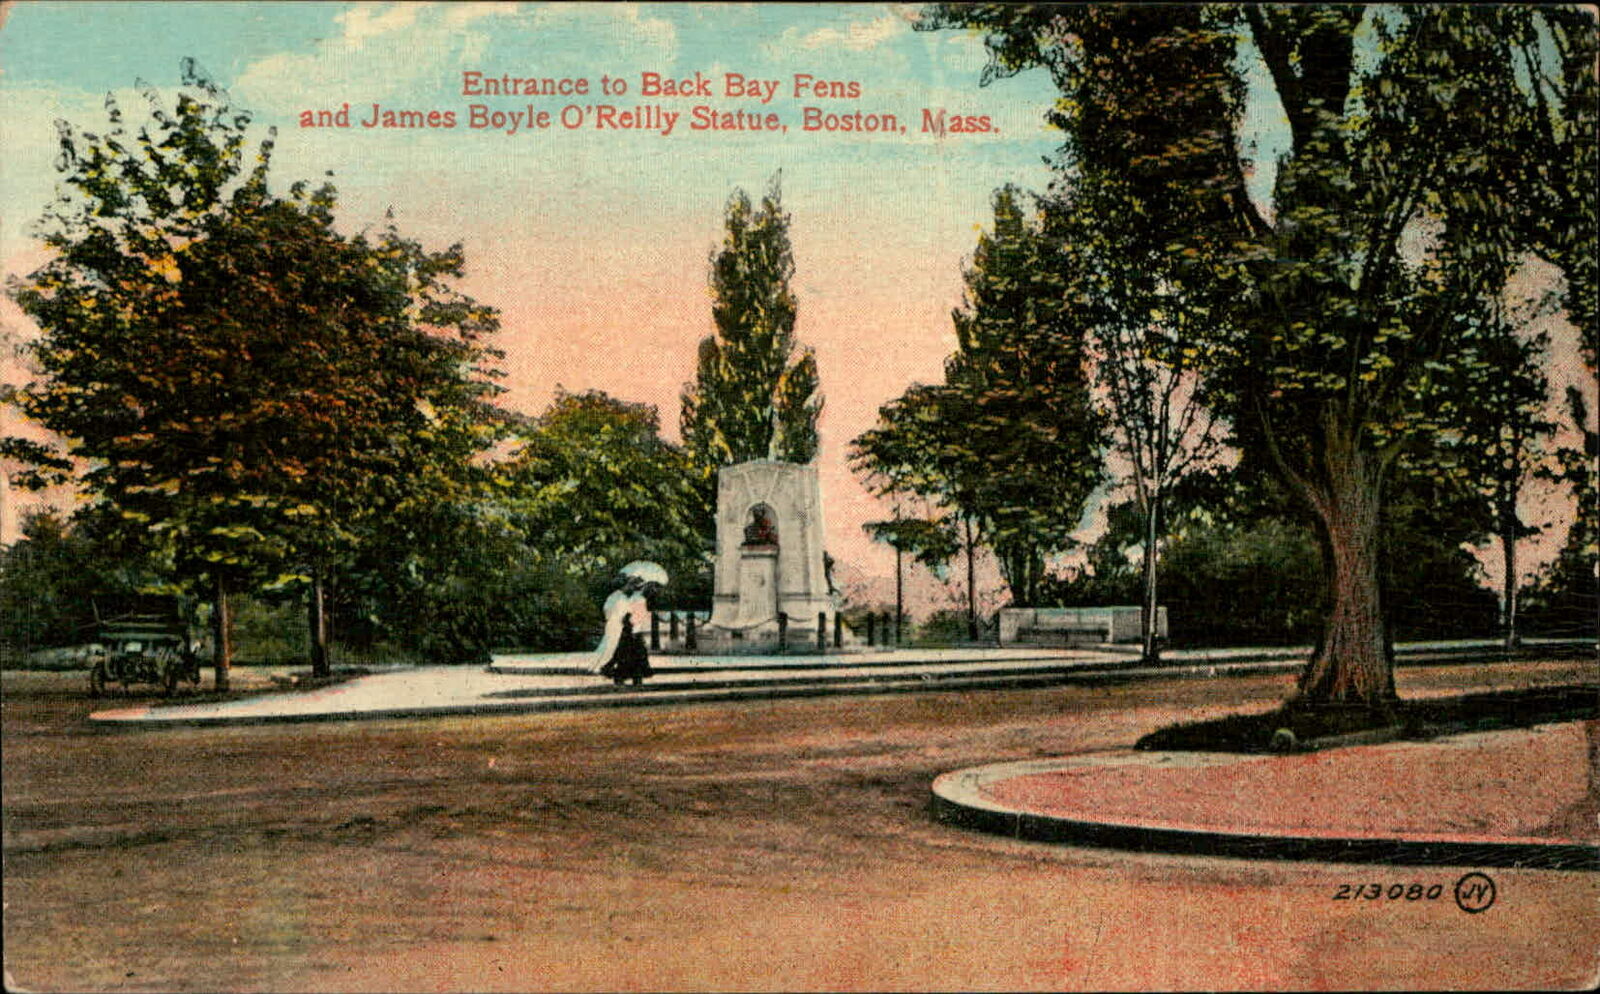 Postcard: Entrance to Back Bay Fens and James Boyle O'Reilly Statue, B